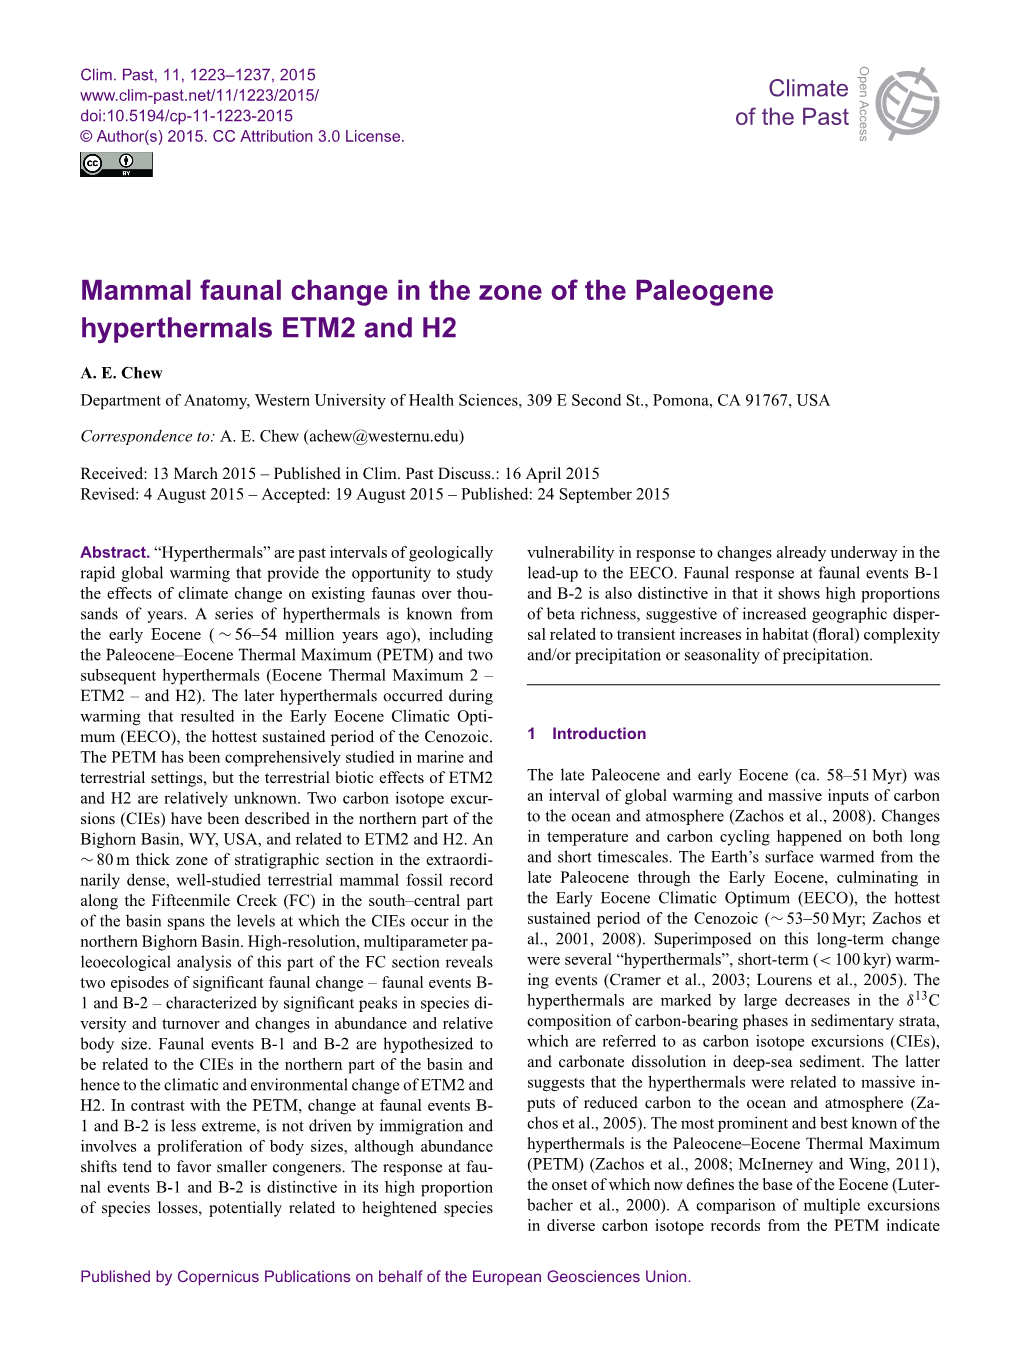 Mammal Faunal Change in the Zone of the Paleogene Hyperthermals ETM2 and H2